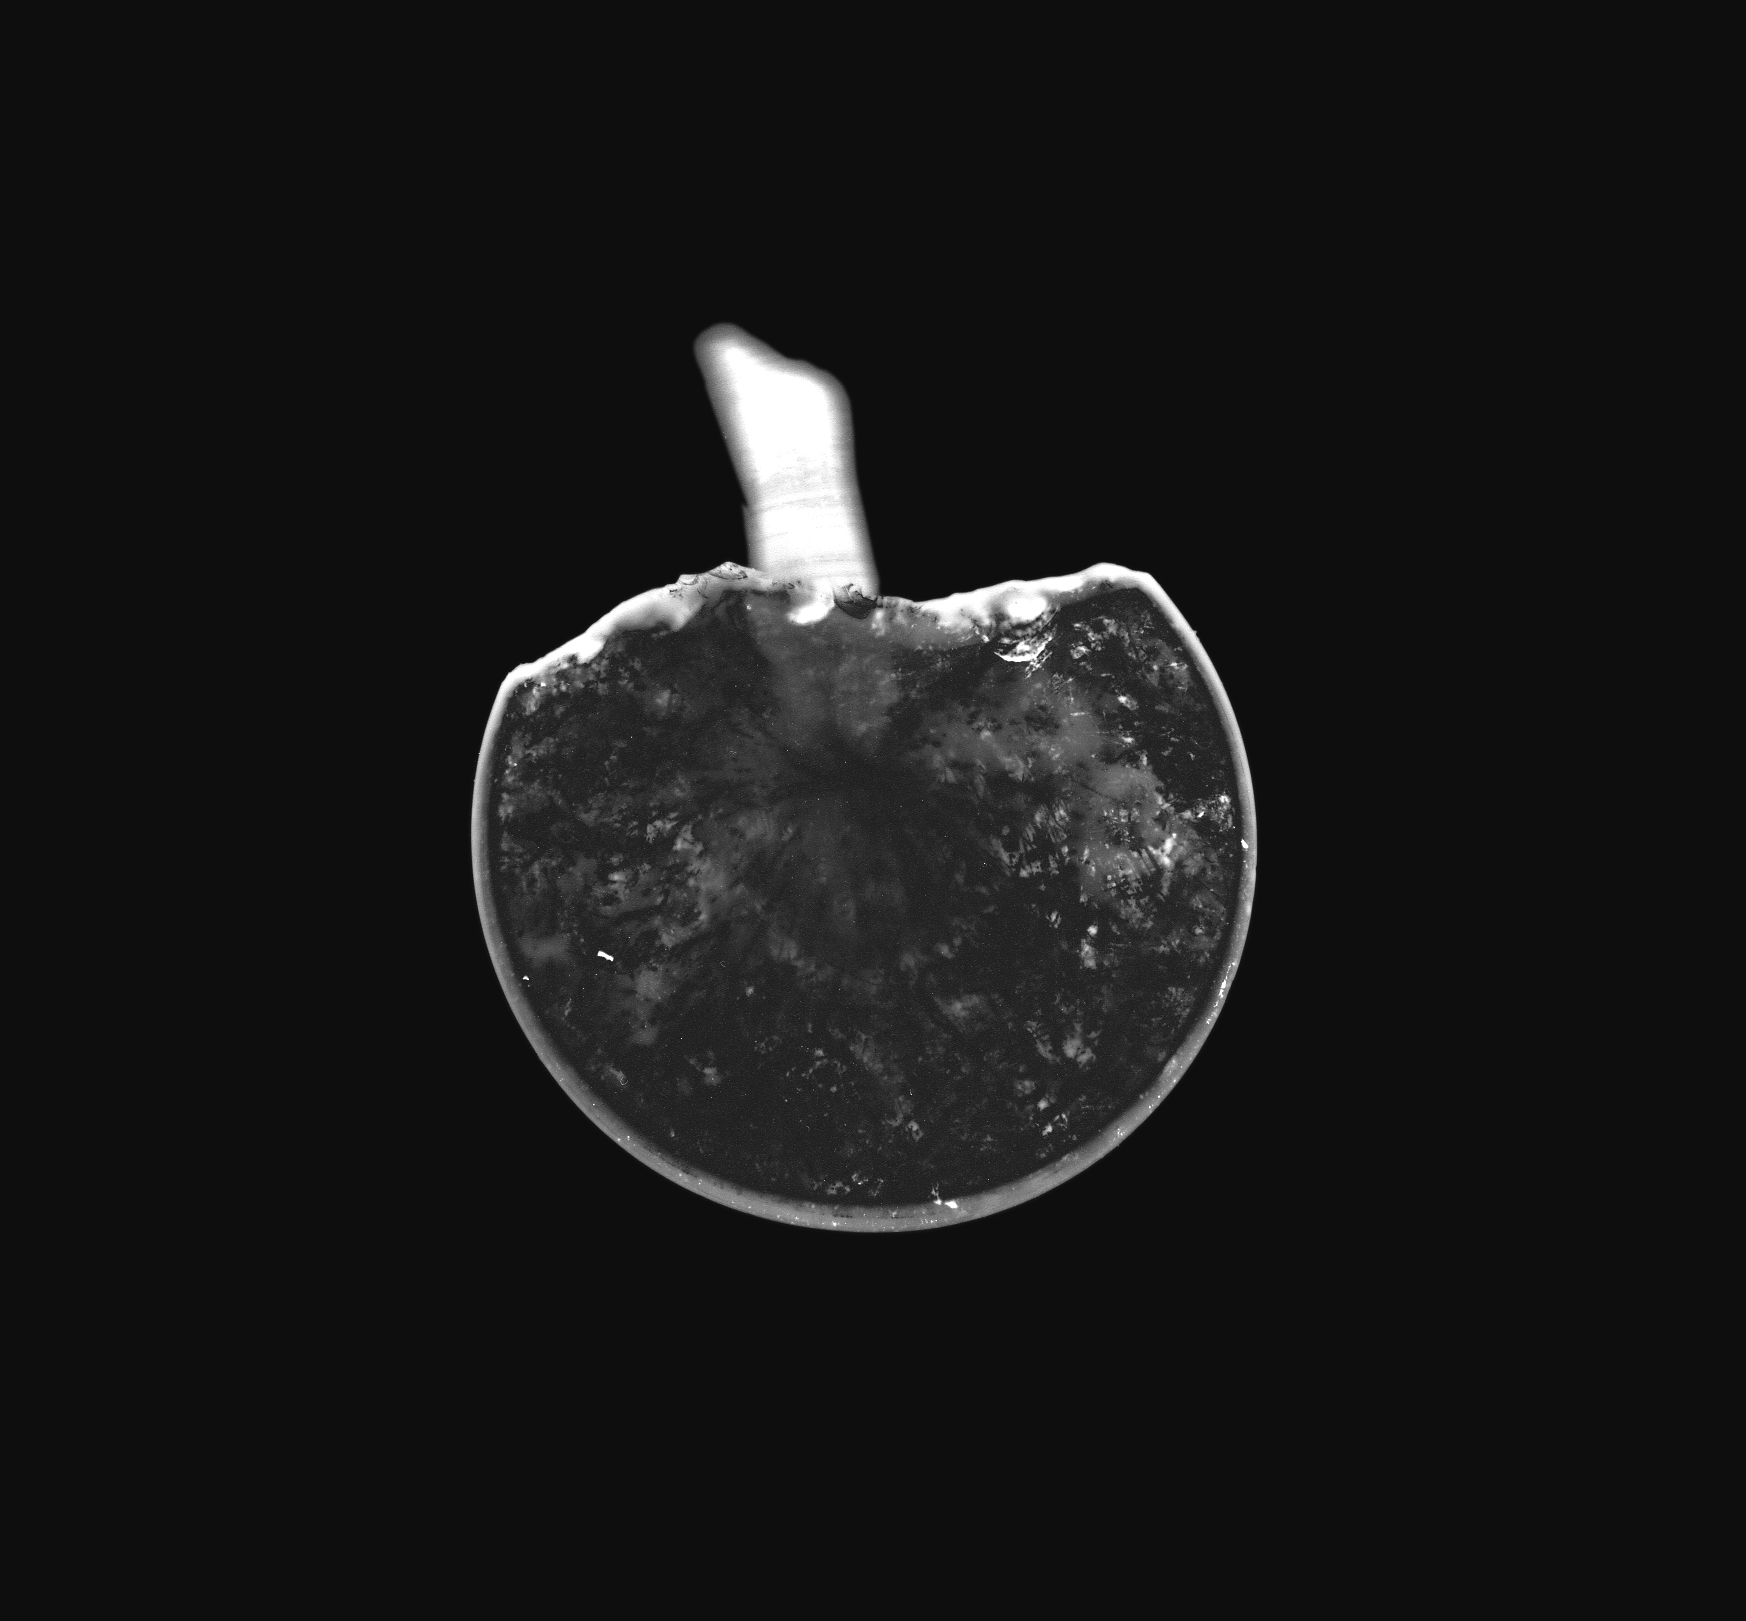 02 Things from the Thames, photogram, 2005, photographic paper, 30 x 30 cm